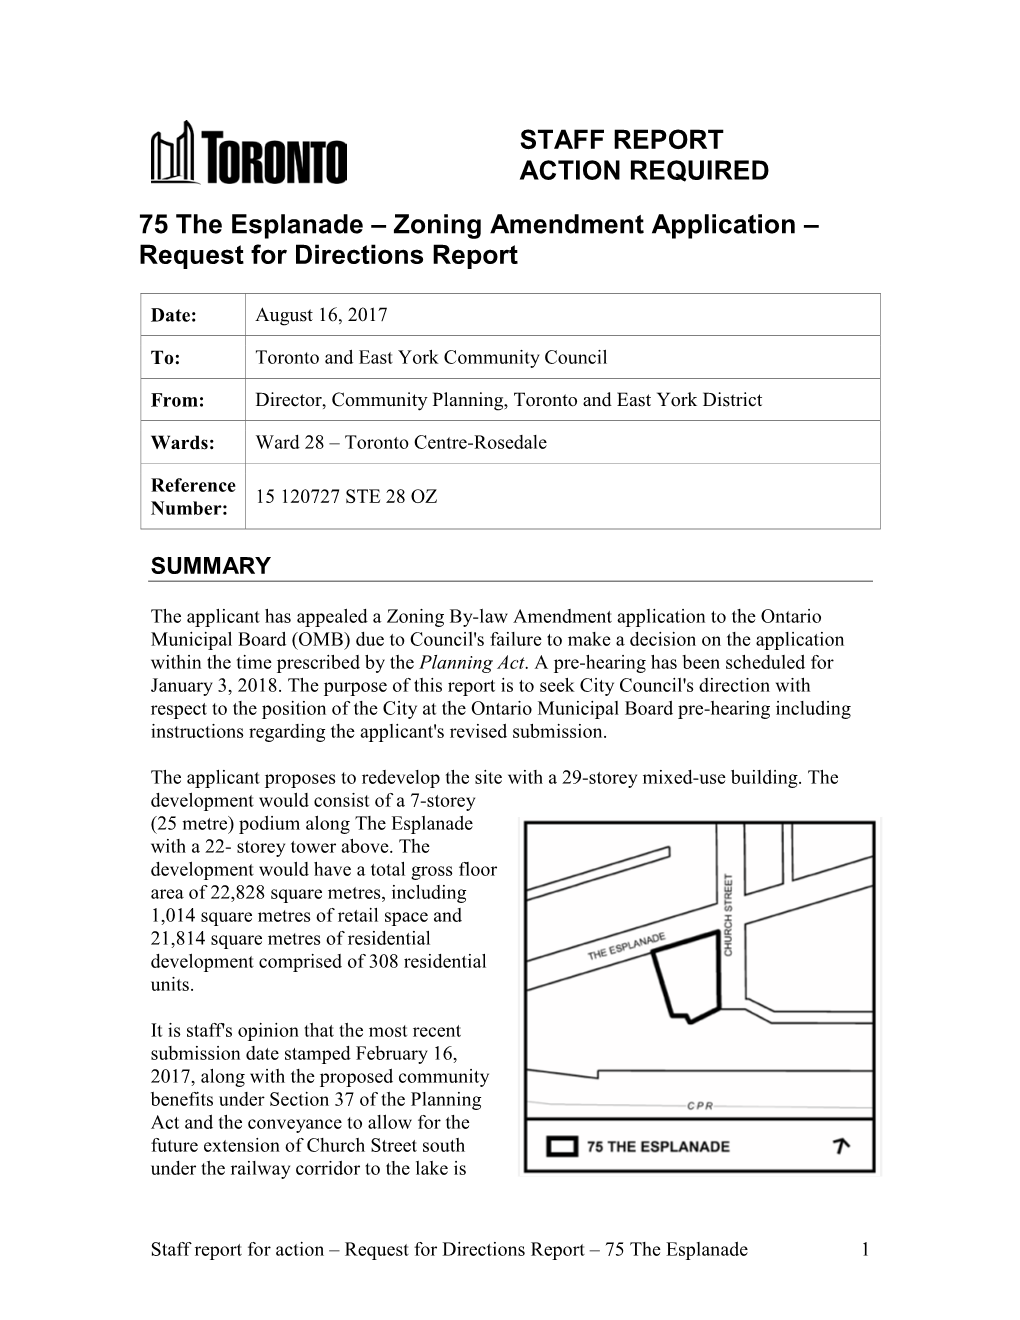 75 the Esplanade – Zoning Amendment Application – Request for Directions Report